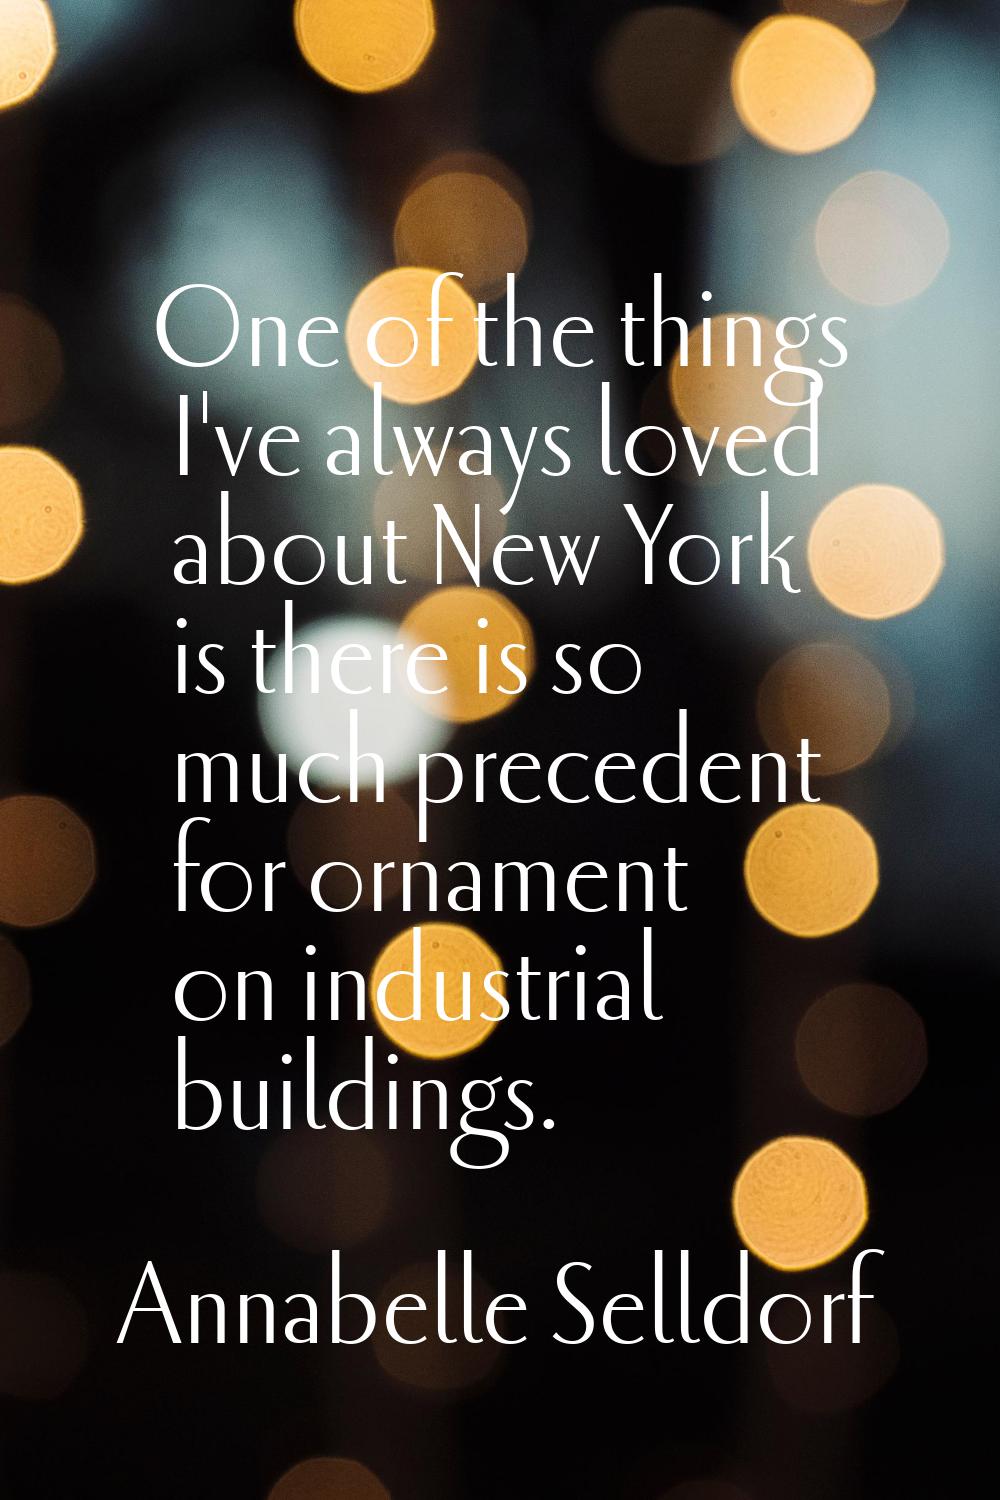 One of the things I've always loved about New York is there is so much precedent for ornament on in